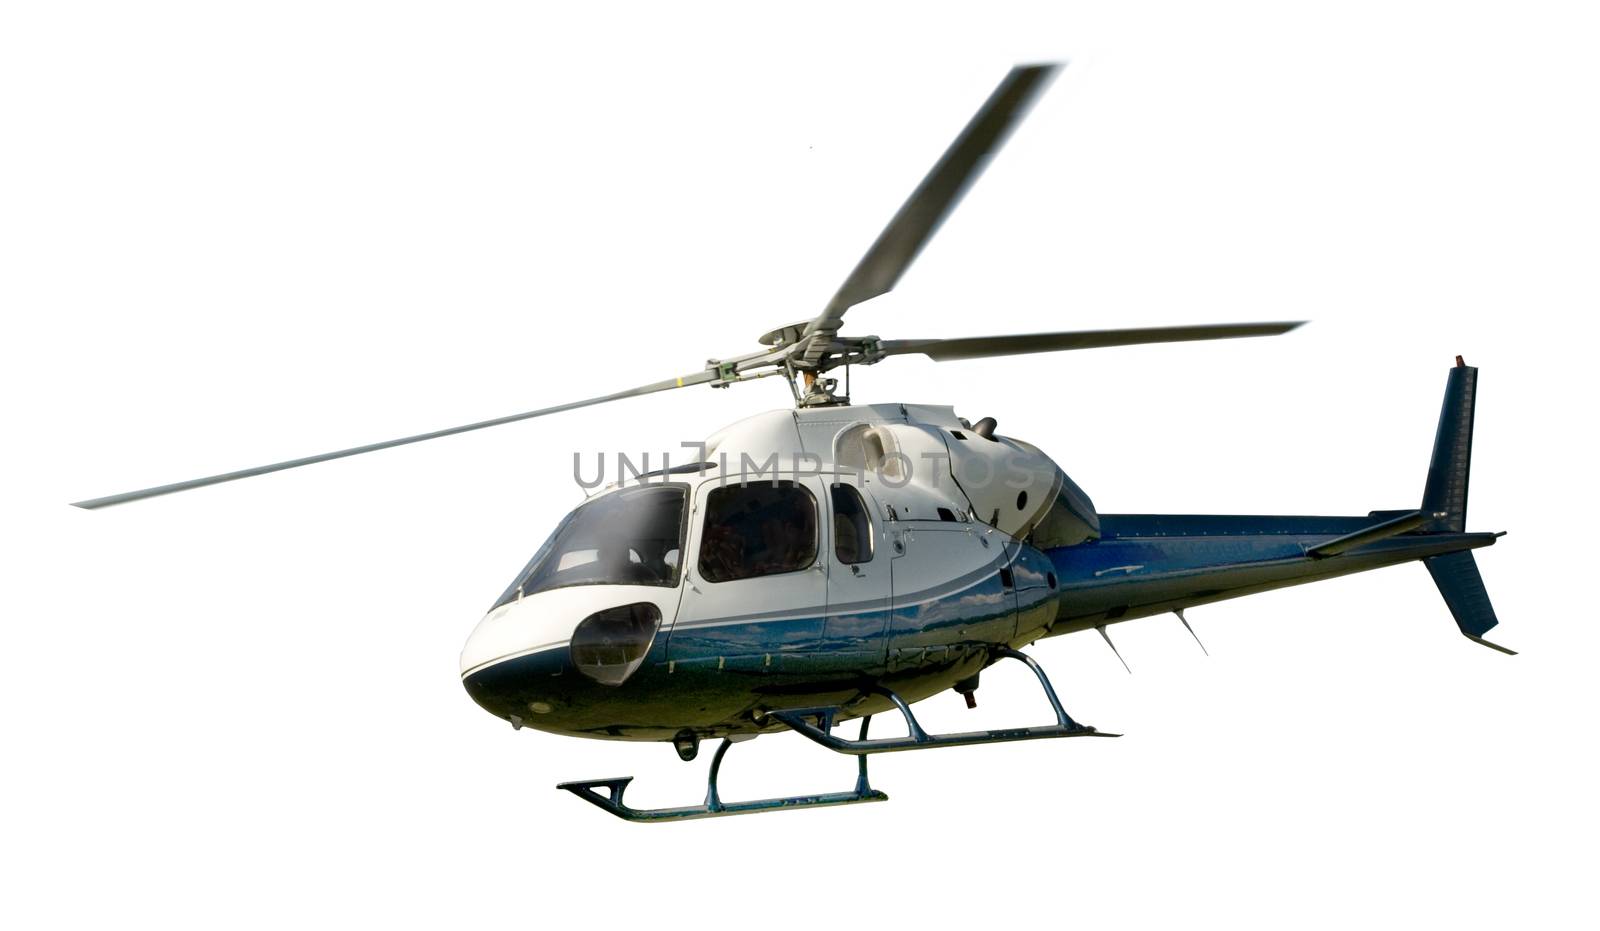 Blue and white helicopter in flight isolated against white background